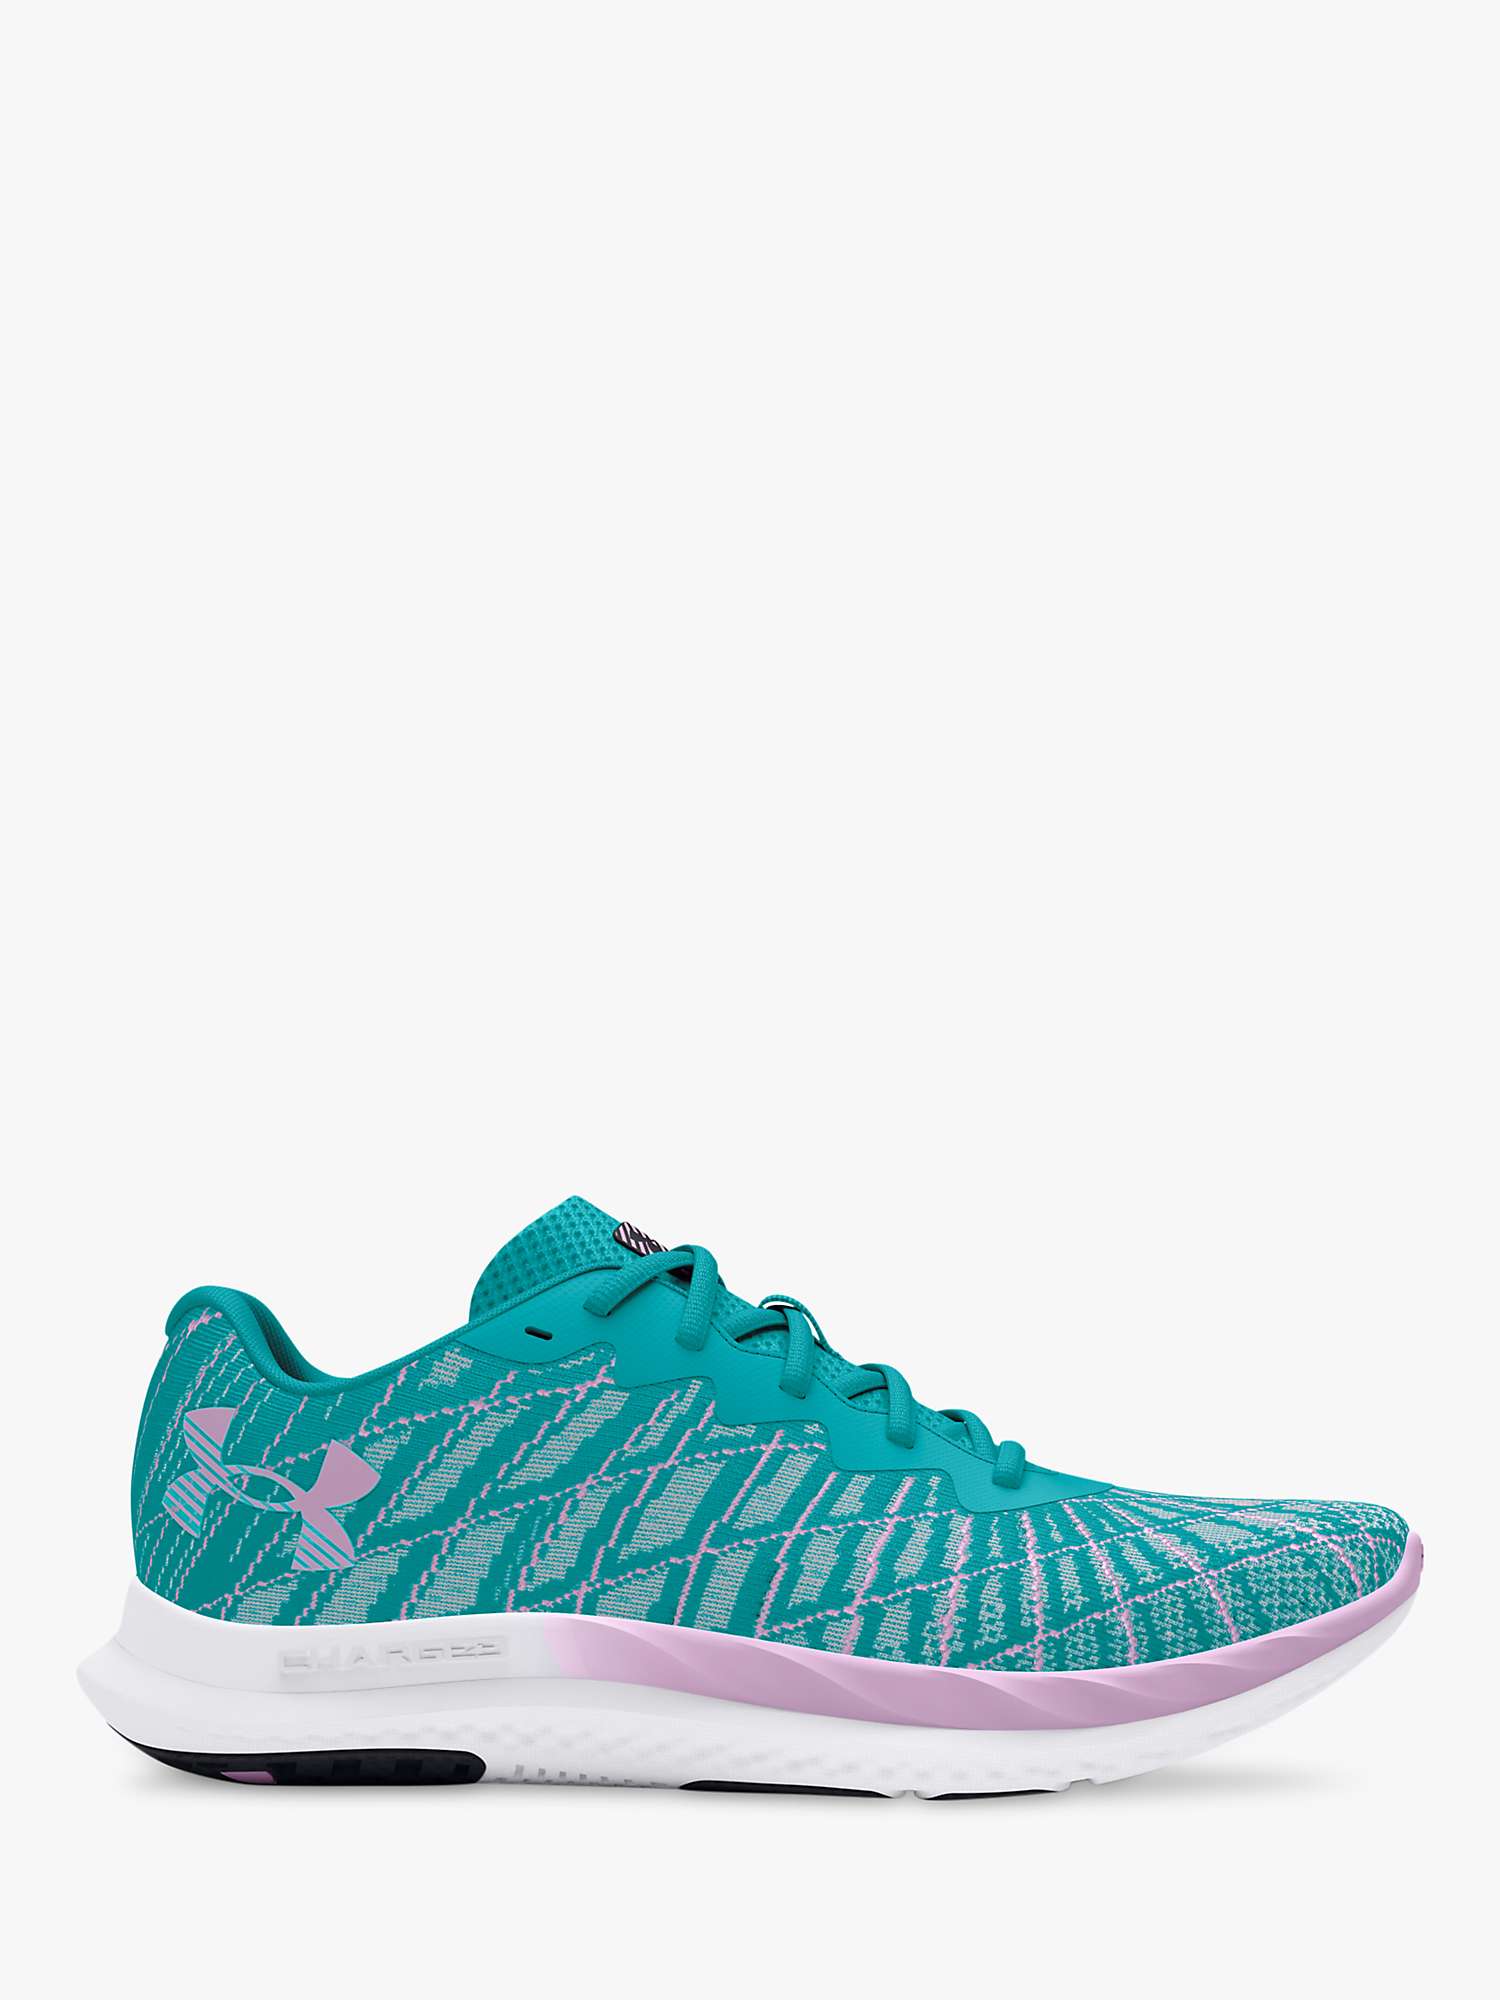 Buy Under Armour Charged Women's Running Shoes, Teal/Purple Ace Online at johnlewis.com